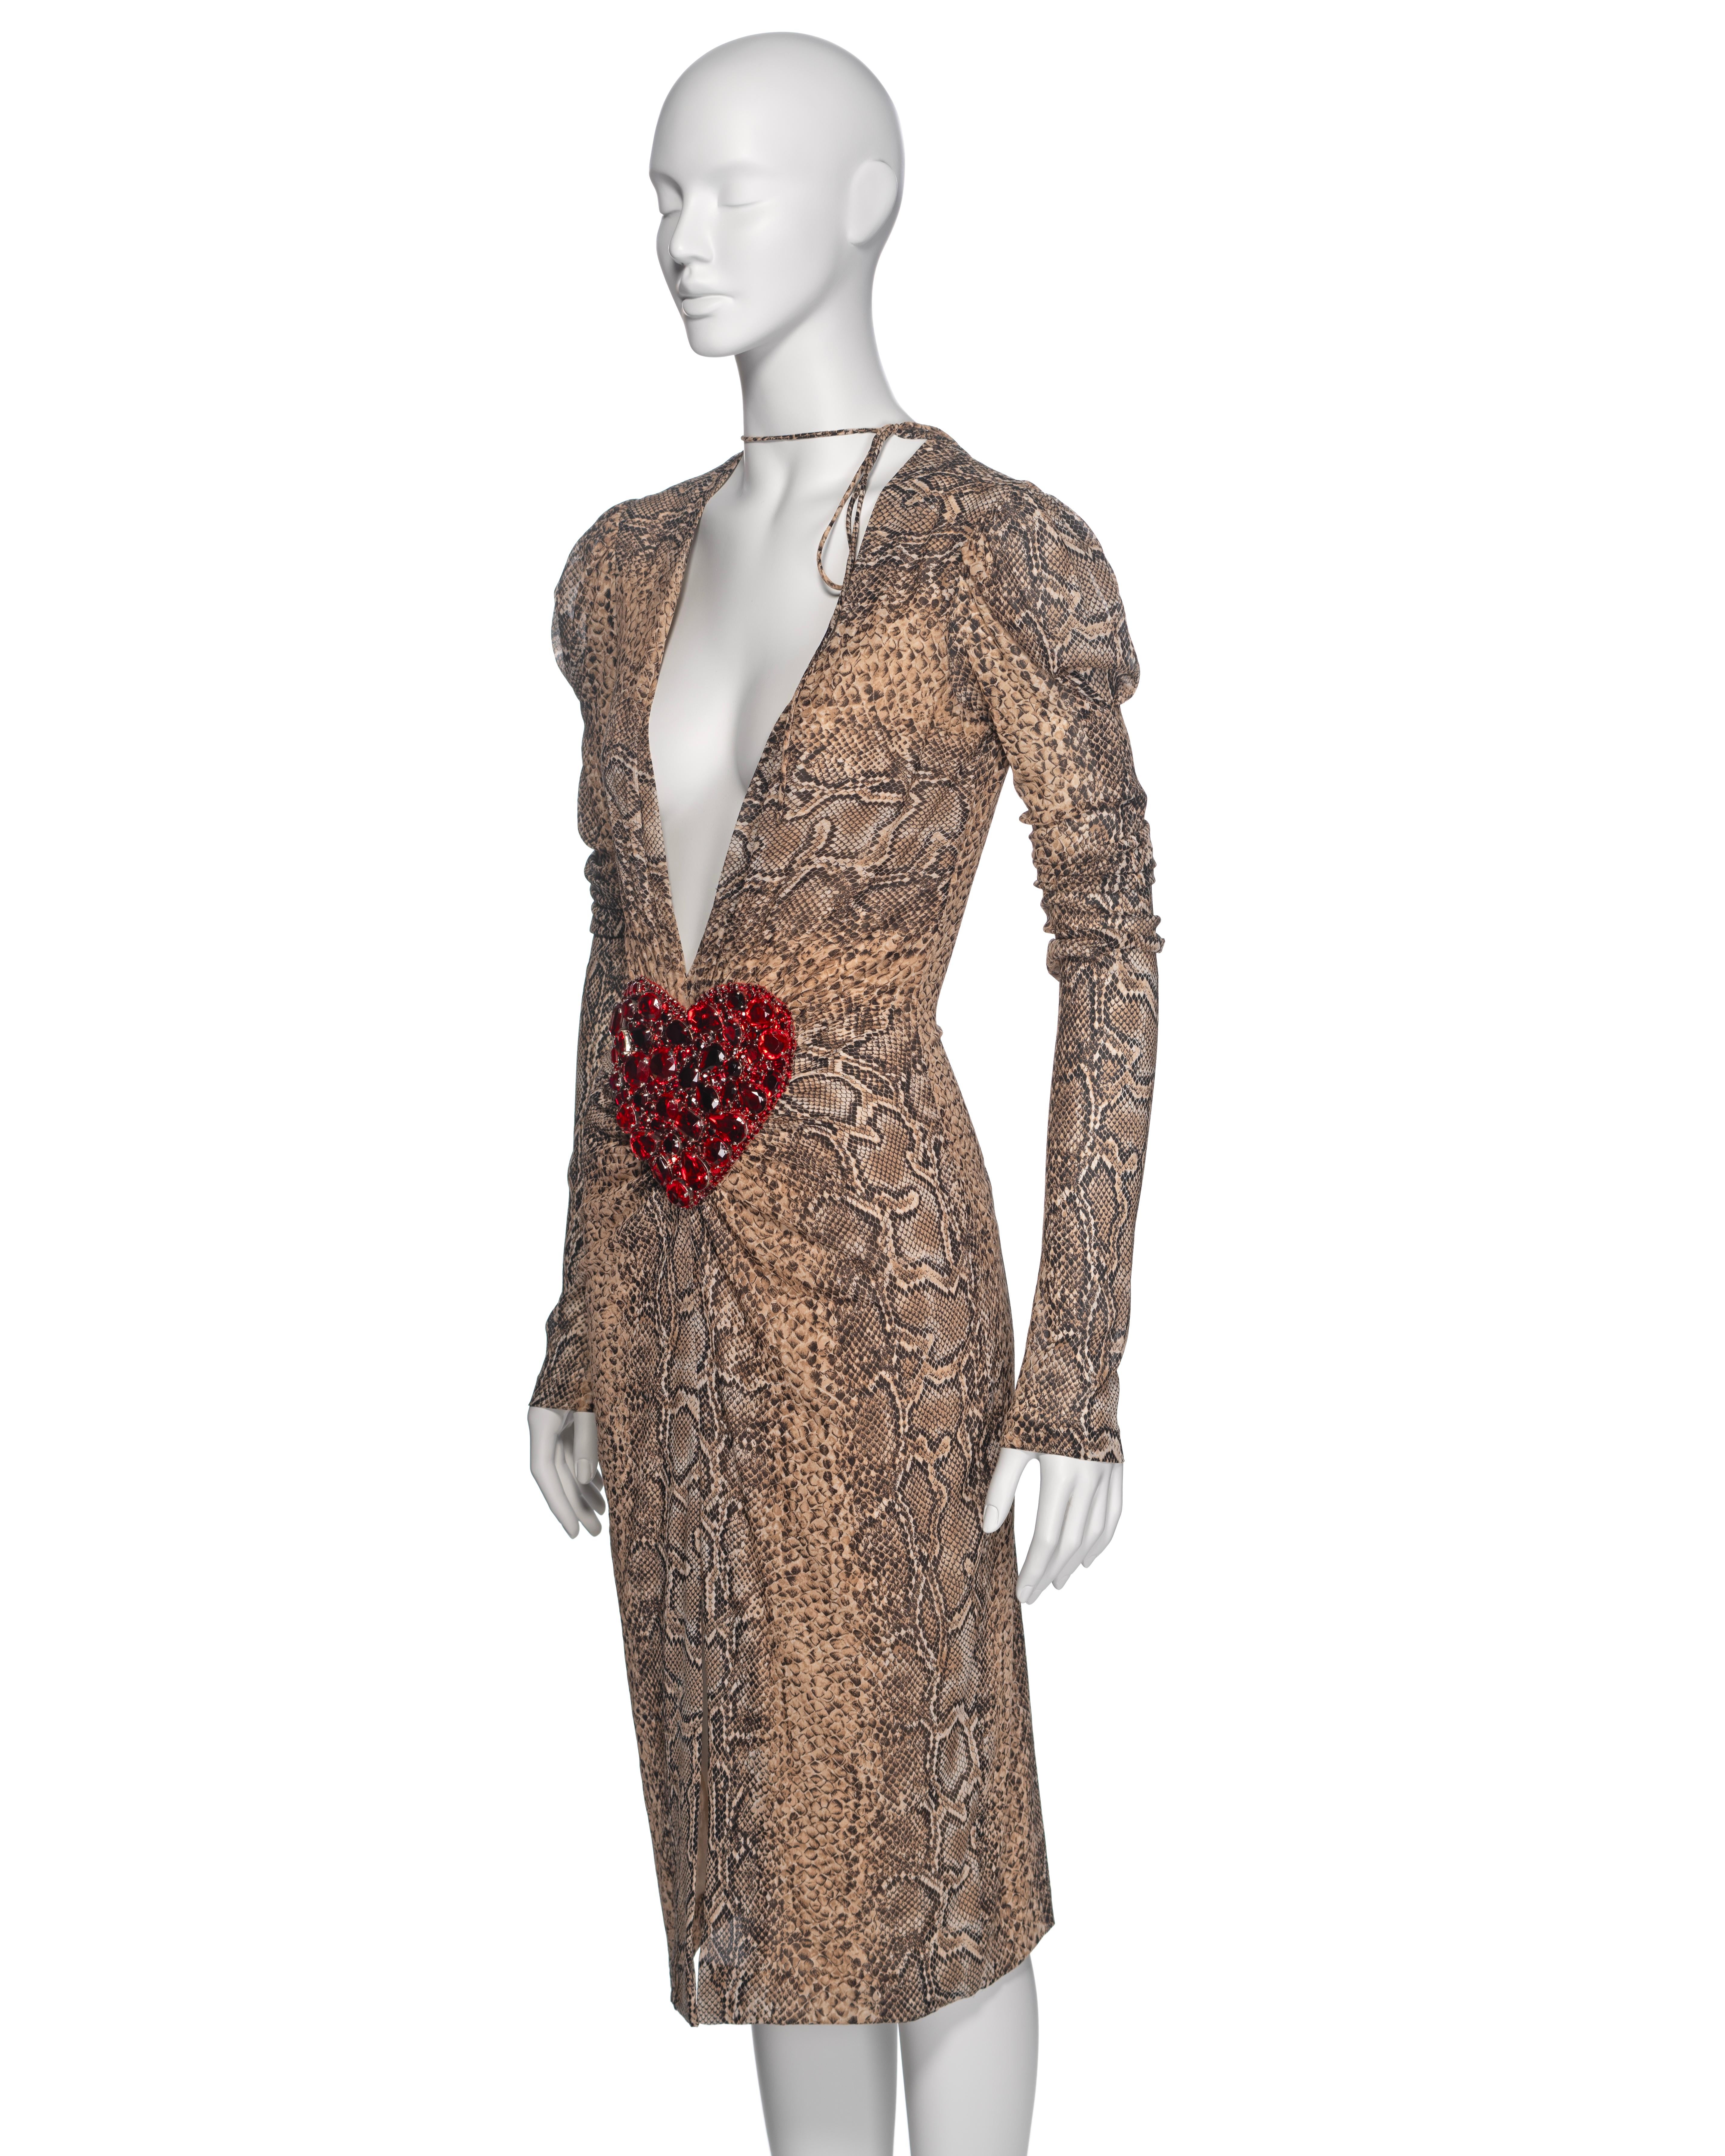 Dolce & Gabbana Snakeskin Print Low Plunge Dress with Crystal Heart, SS 2005 For Sale 7